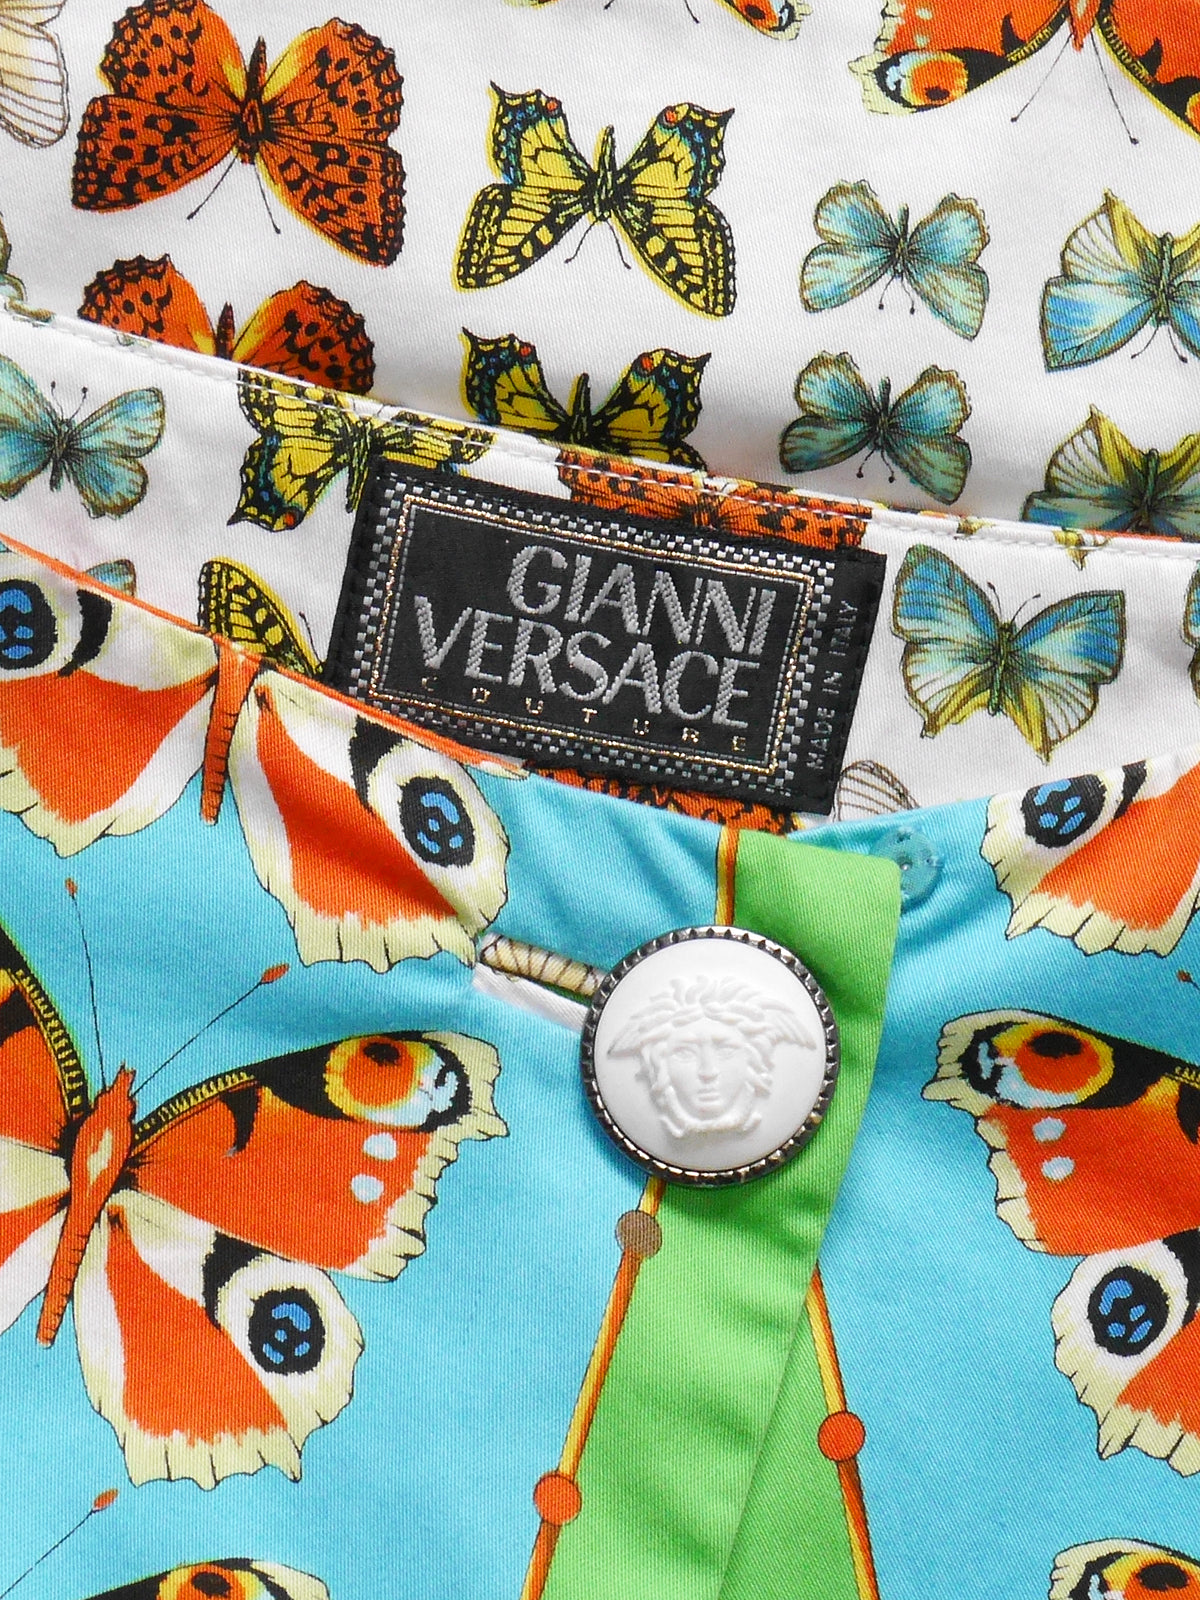 GIANNI VERSACE Couture Spring 1995 Butterfly Print Skirt Size XS